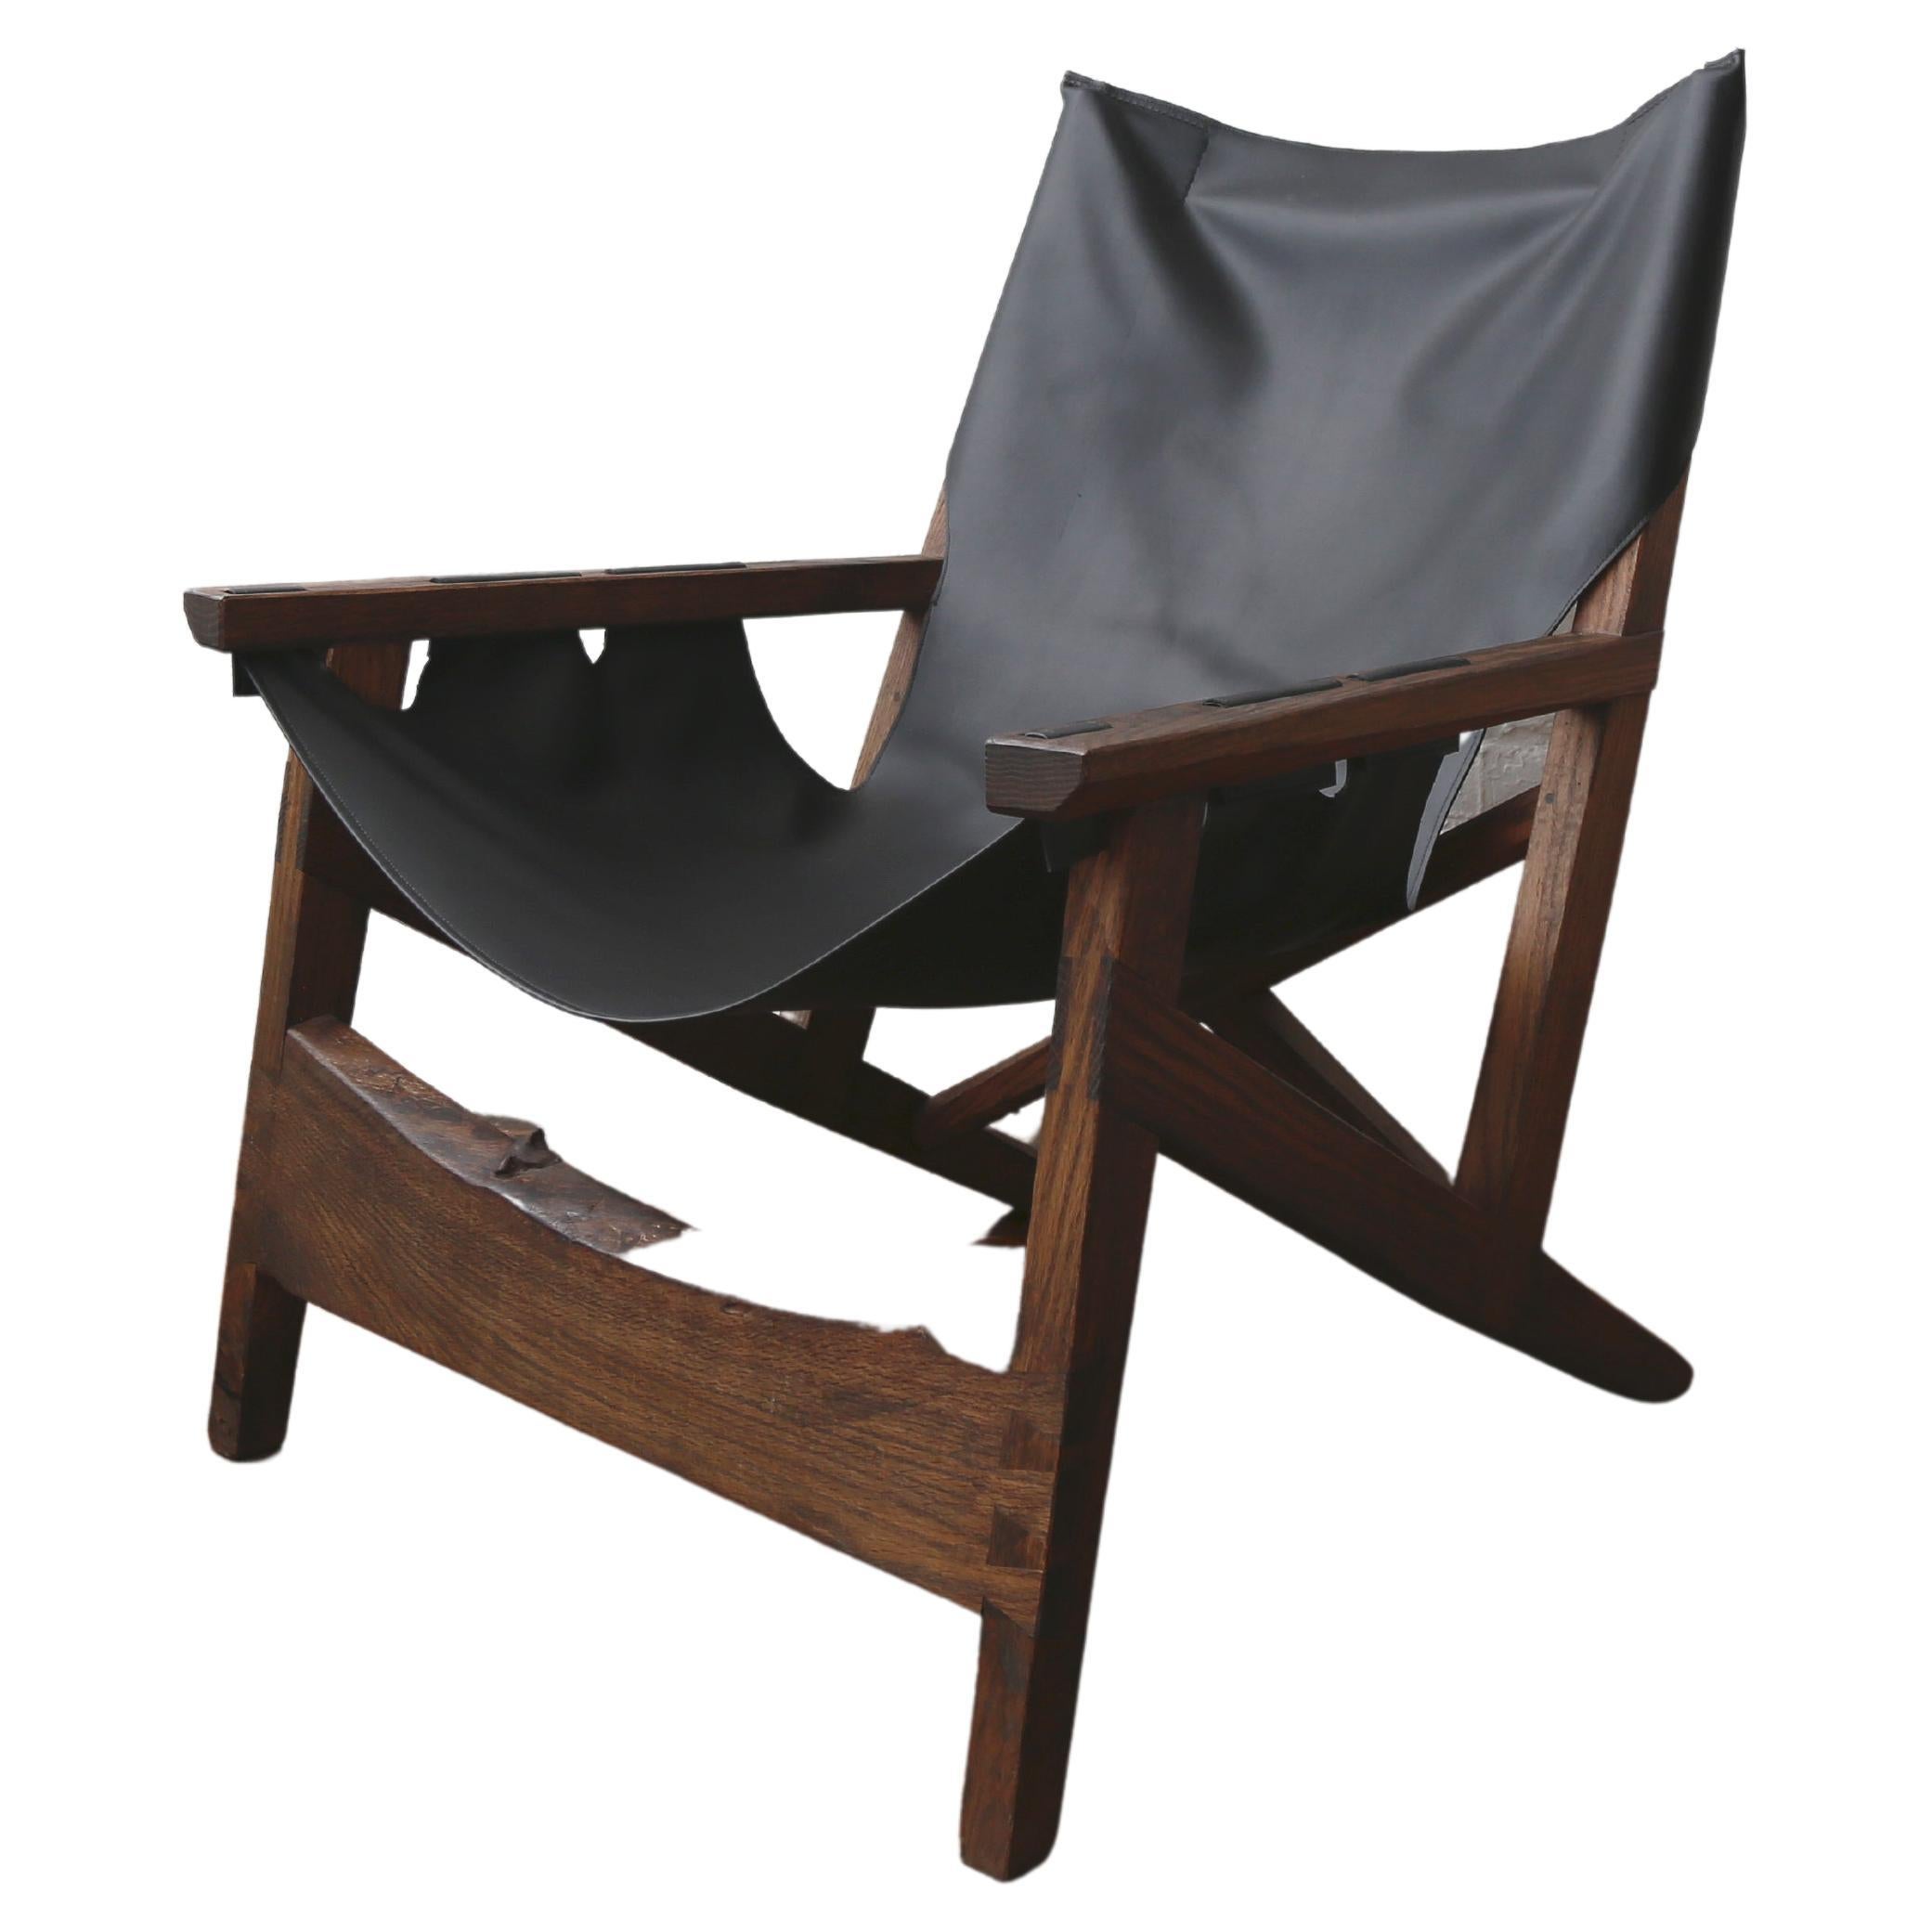 Fuugs Sling Chair Blackened Oak with Cactus Leather Sling